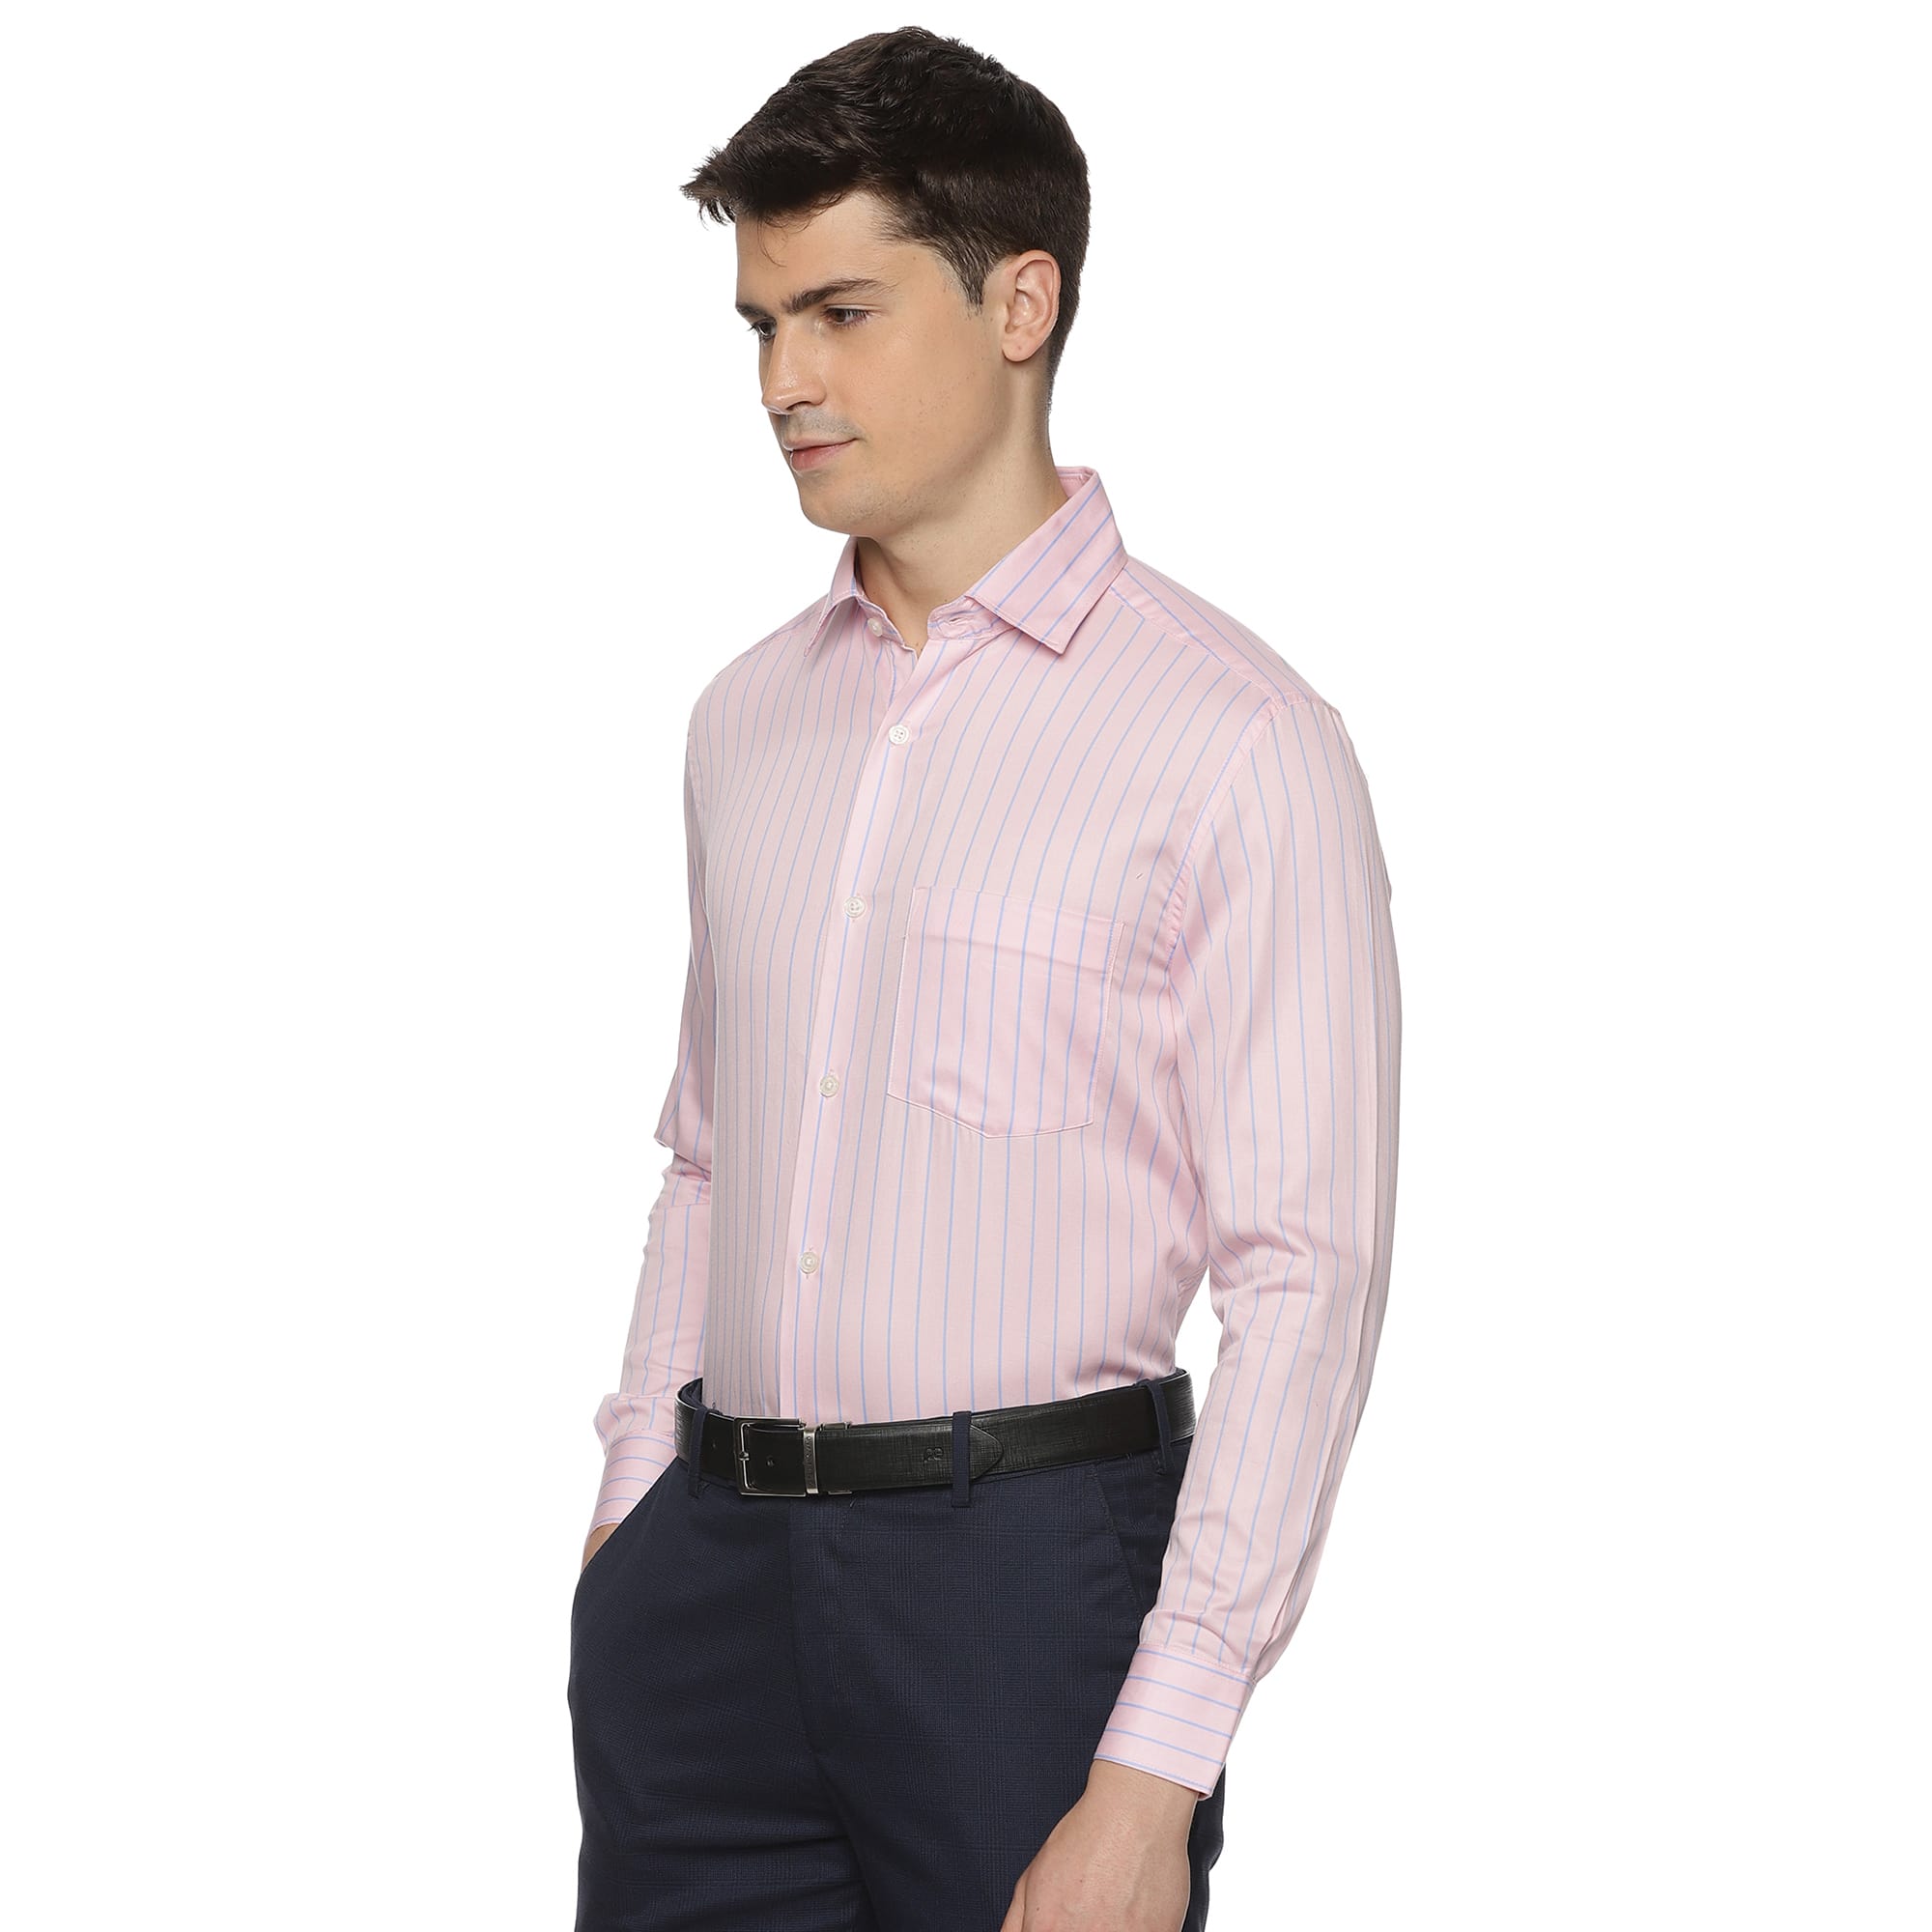 Enigma Blue Stripes Shirt In Pink - The Formal Club